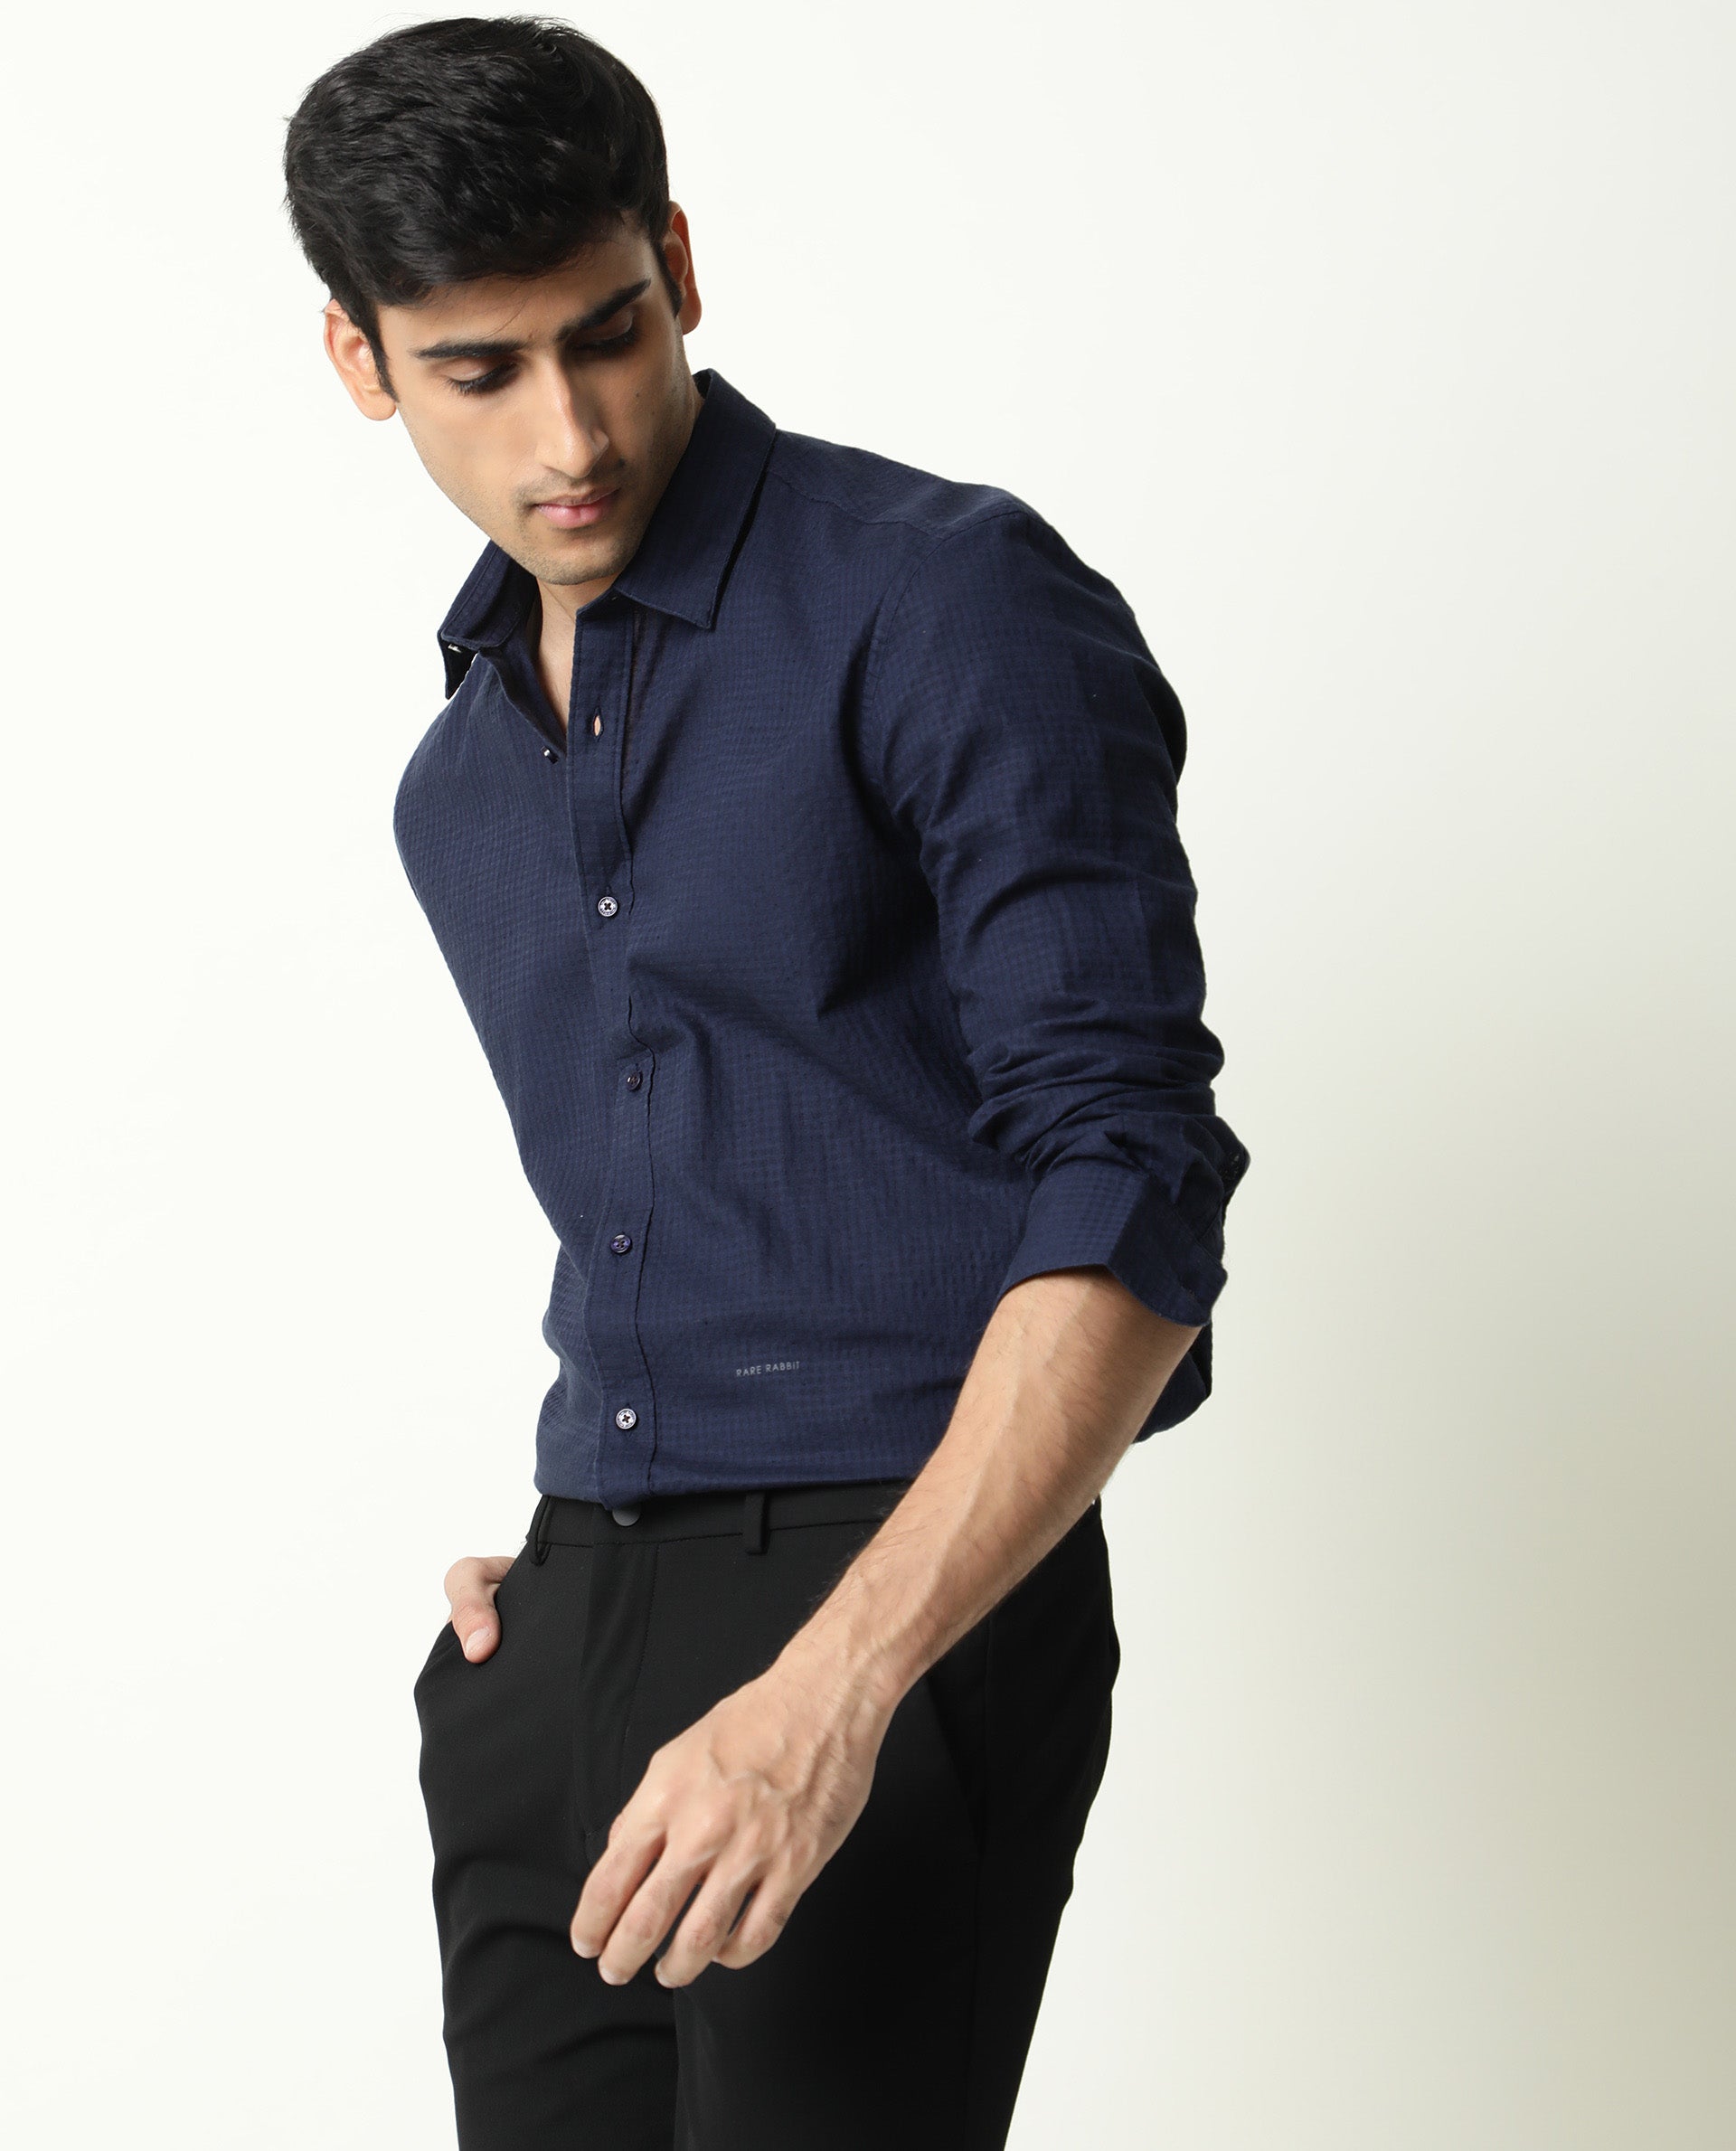 What colour pants go best with a navy blue shirt with white stripes  Quora